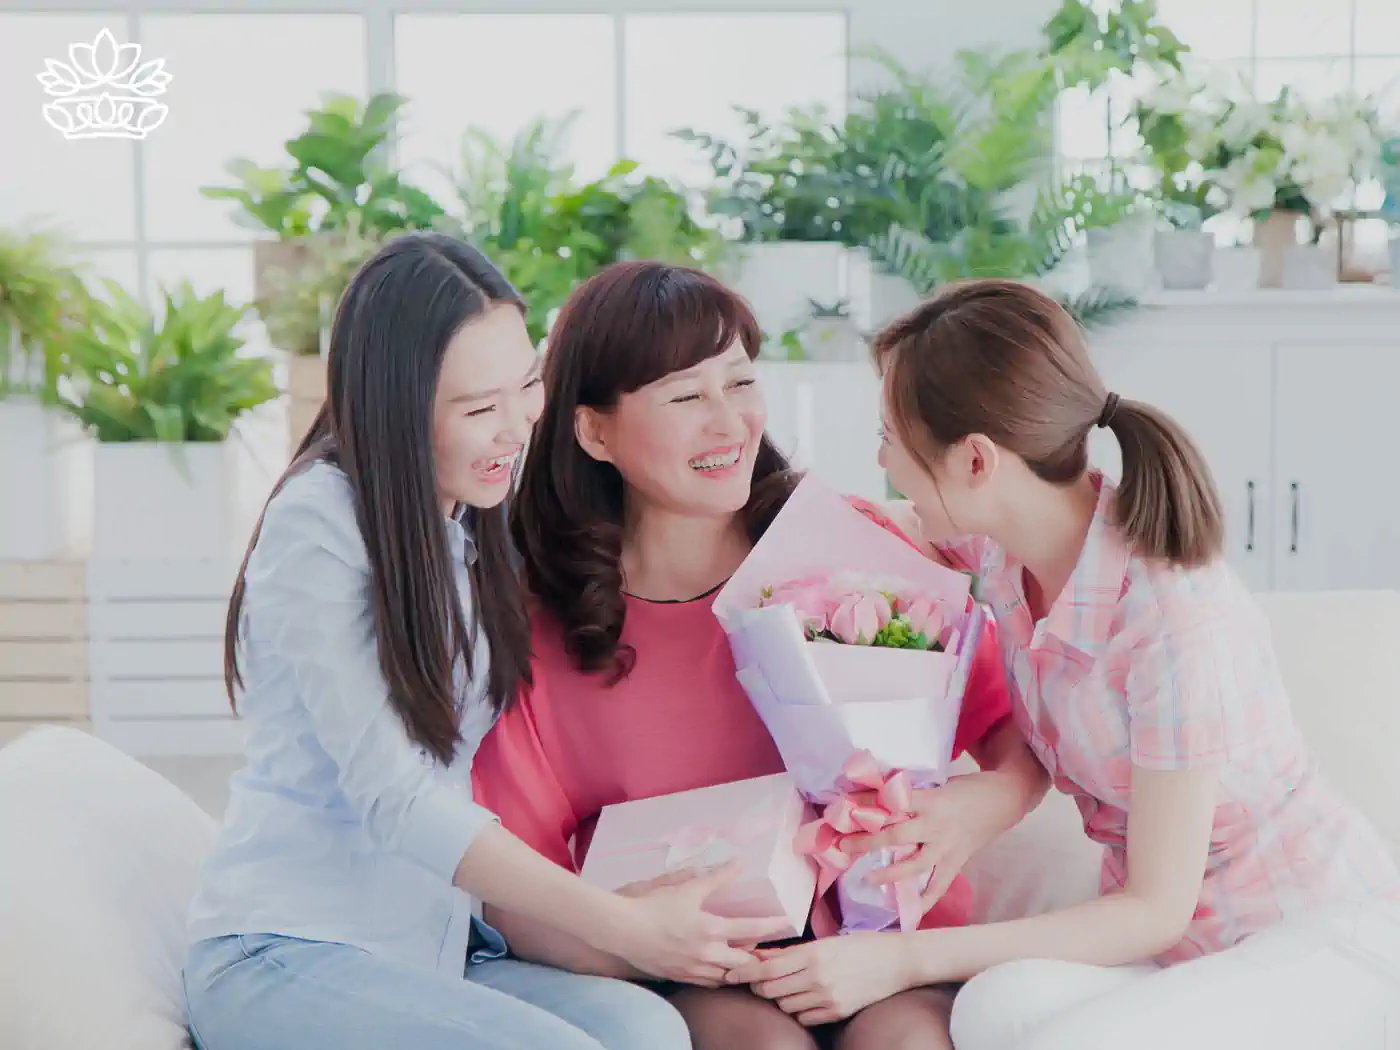 Three women sharing a joyful moment, holding a bouquet and gift box. Fabulous Flowers and Gifts.